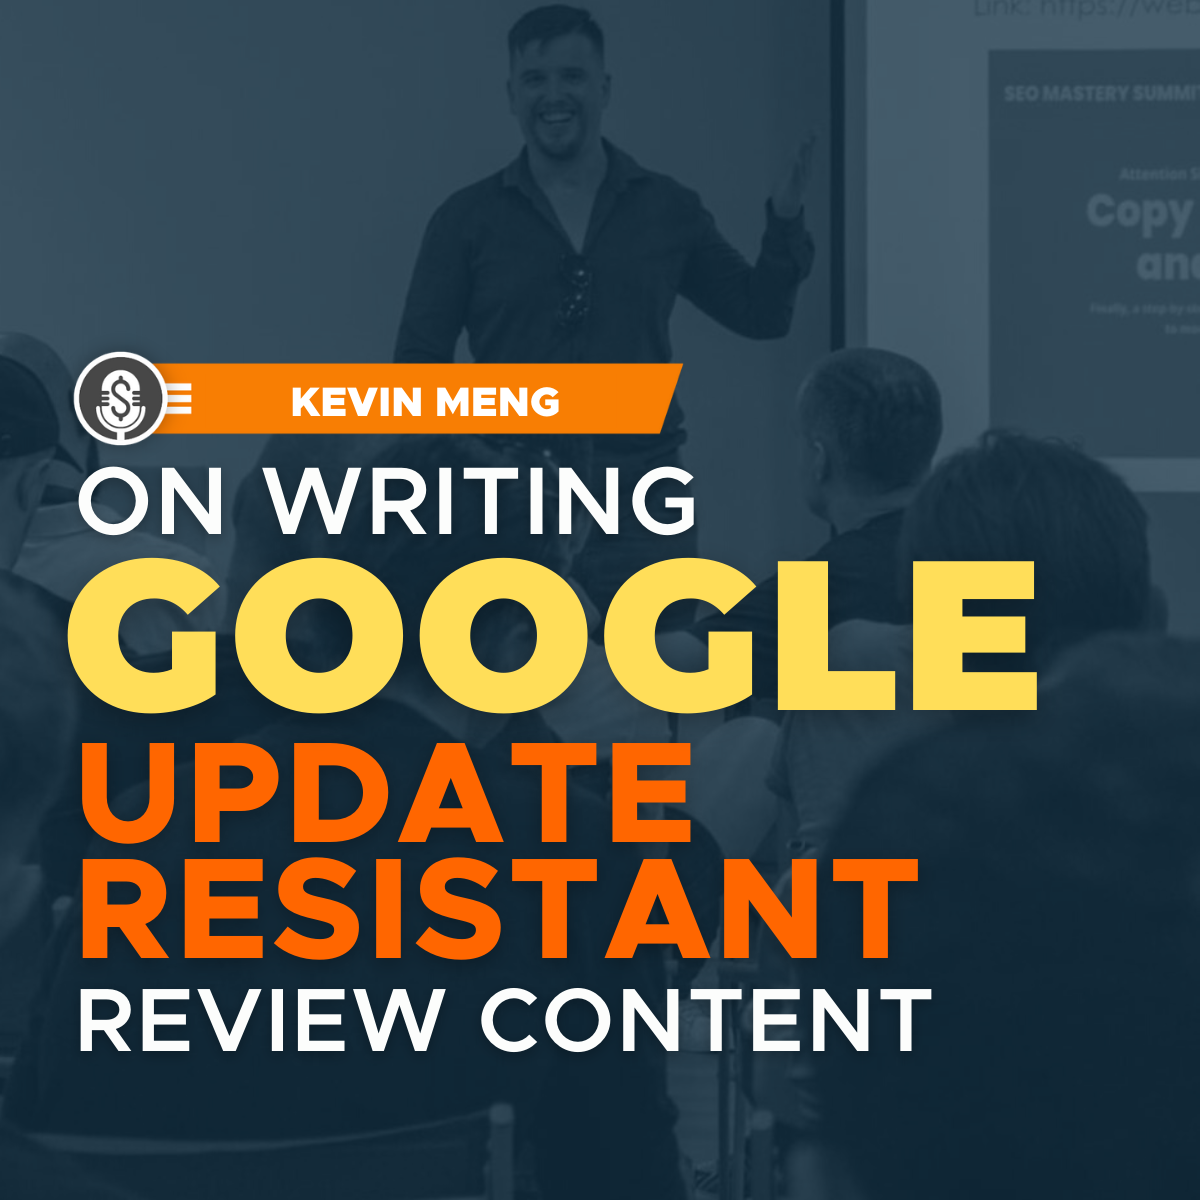 Kevin Meng on writing Google update resistant review content & building and selling courses